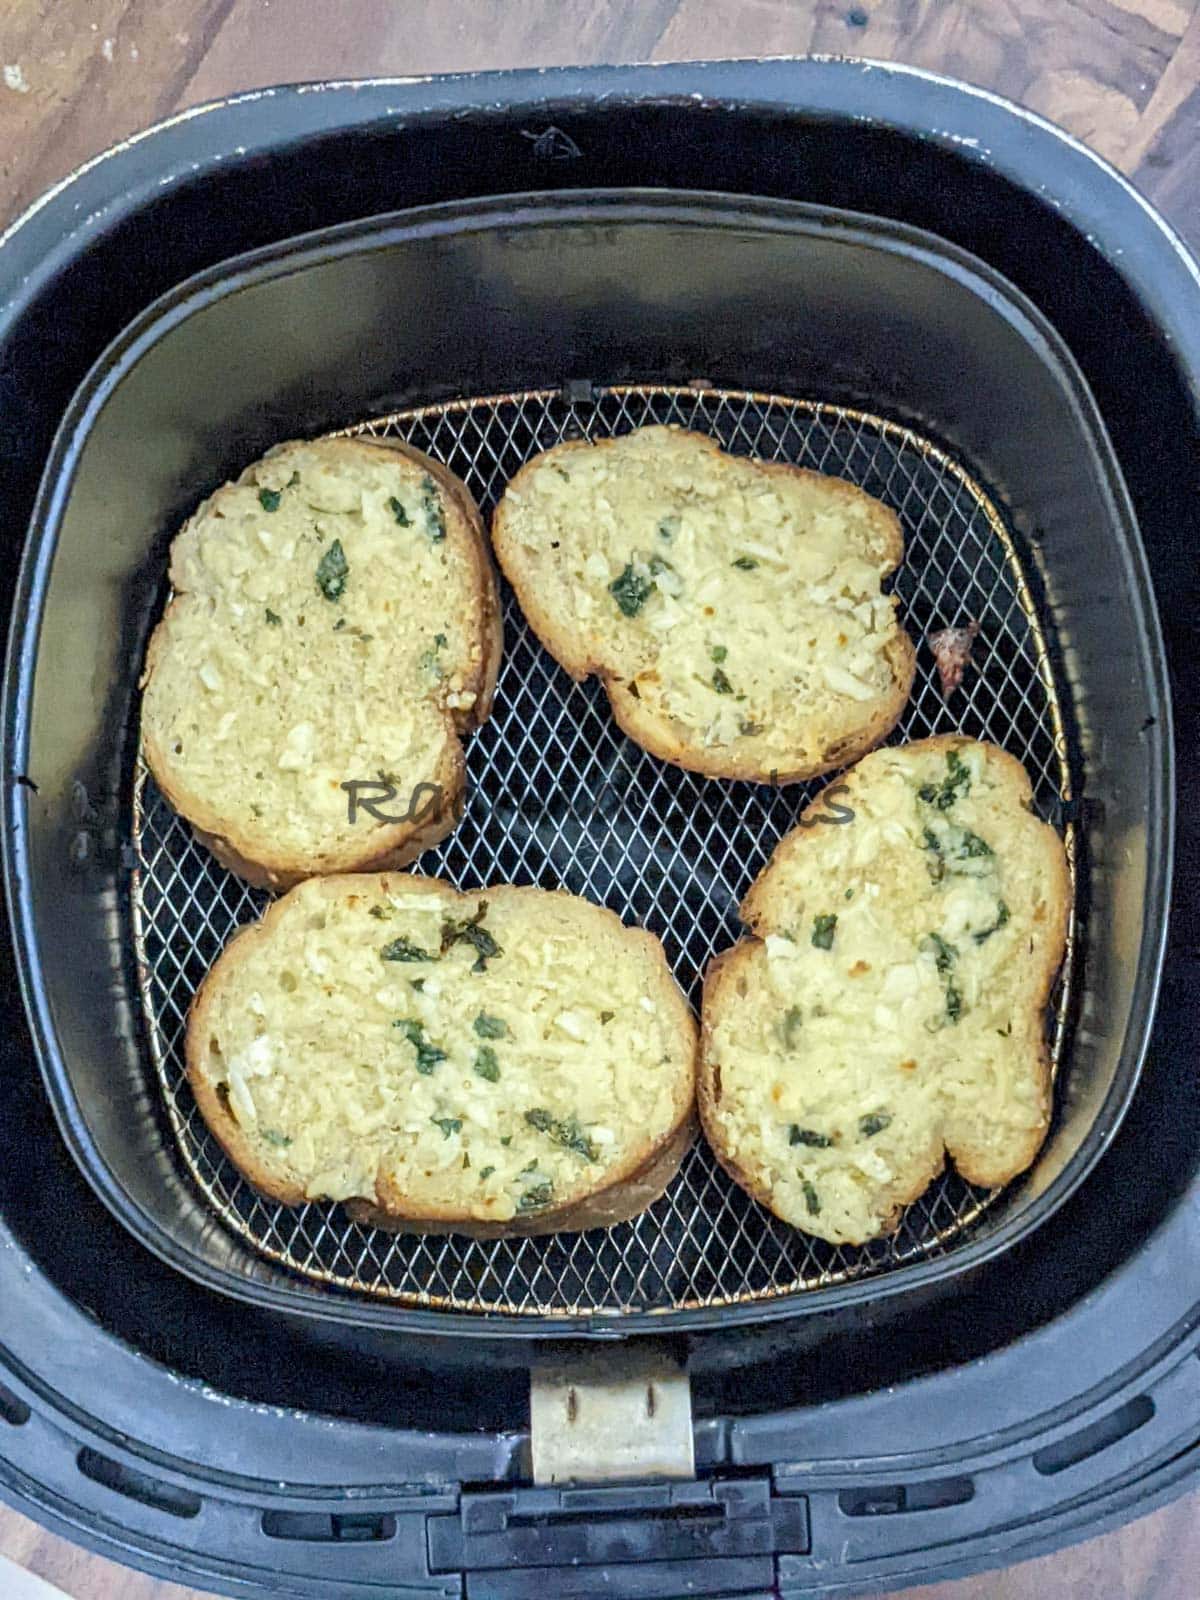 Toasty garlic bread after air frying in air fryer basket.